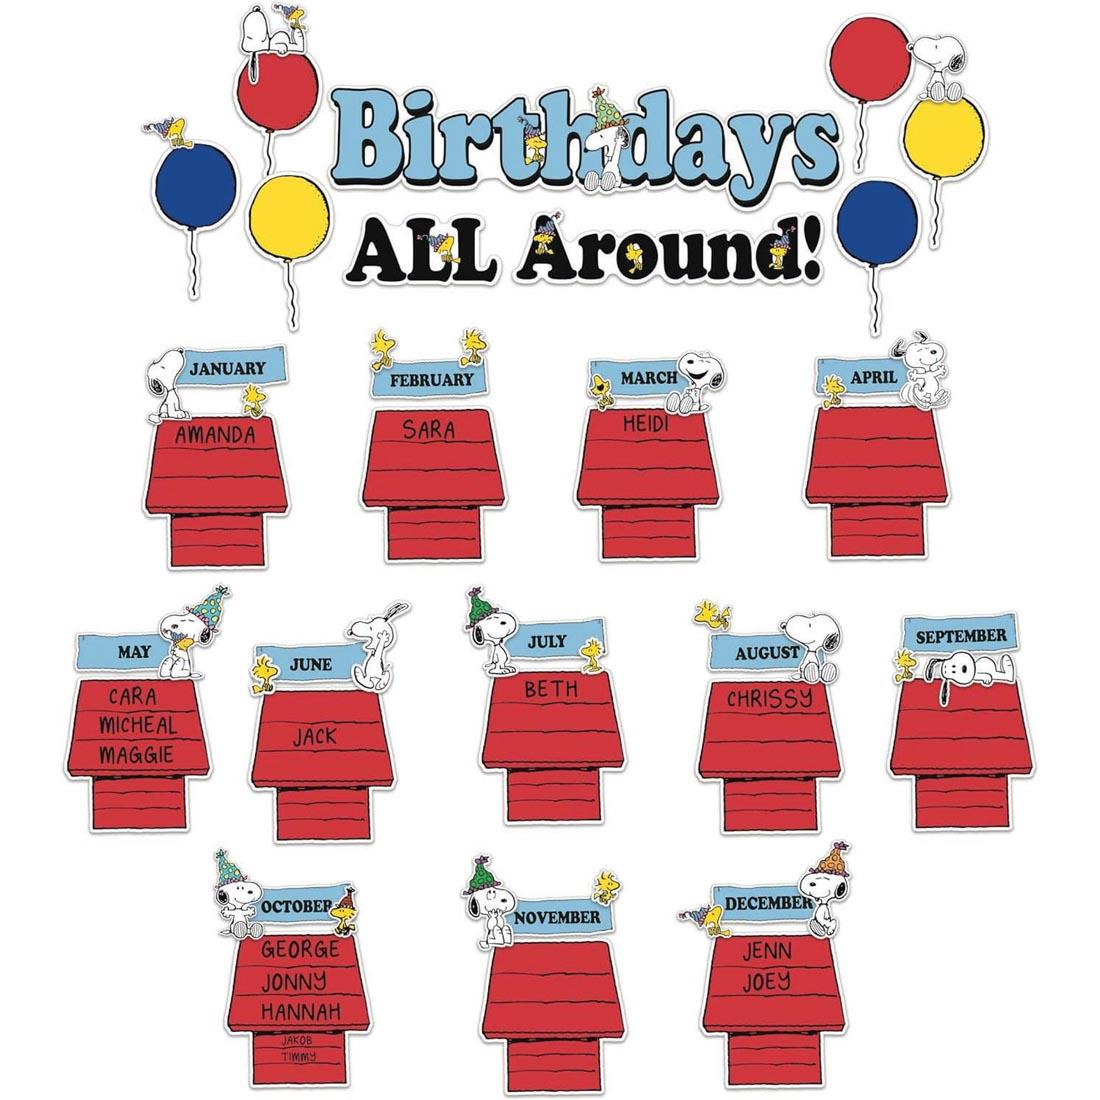 Birthday Mini Bulletin Board Set from the Peanuts collection by Eureka